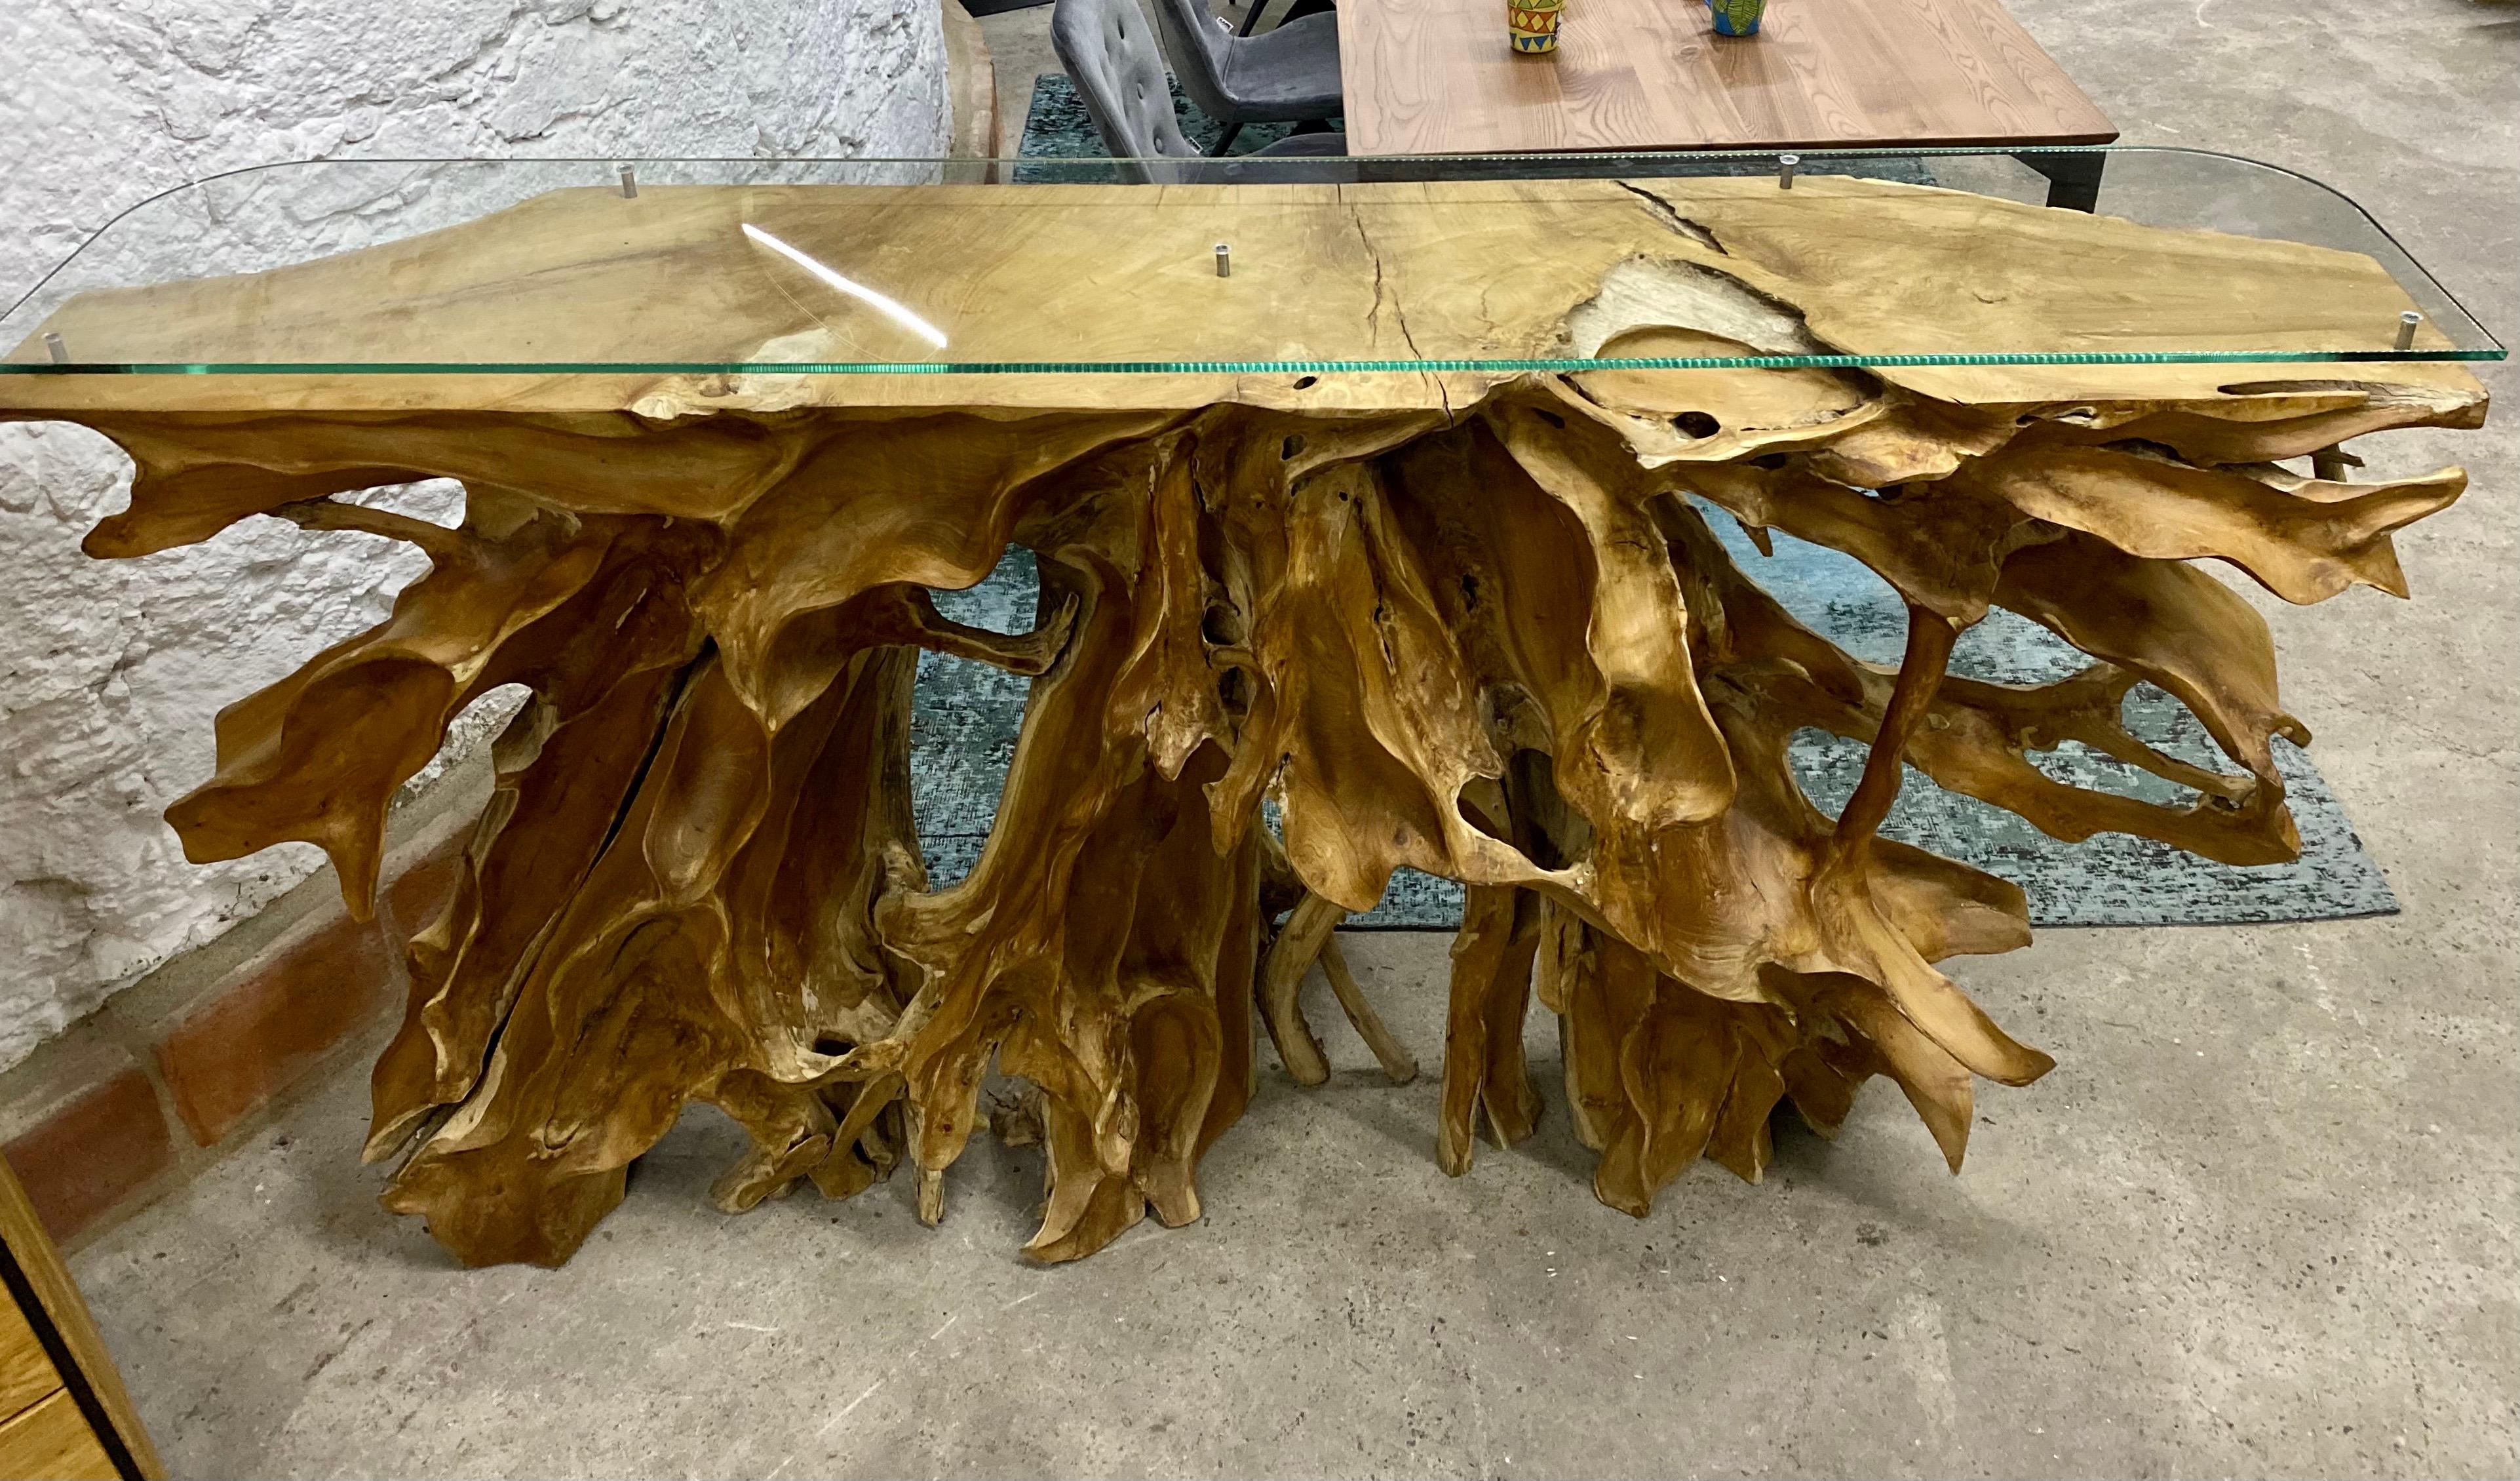 Extraordinary organic modern teak root console/ sideboard toped by a safety glass panel. A contemporary organic console table with outstanding appearance. Artfully cutted out of a large teak root and elaborately hand-sanded by the artist, this